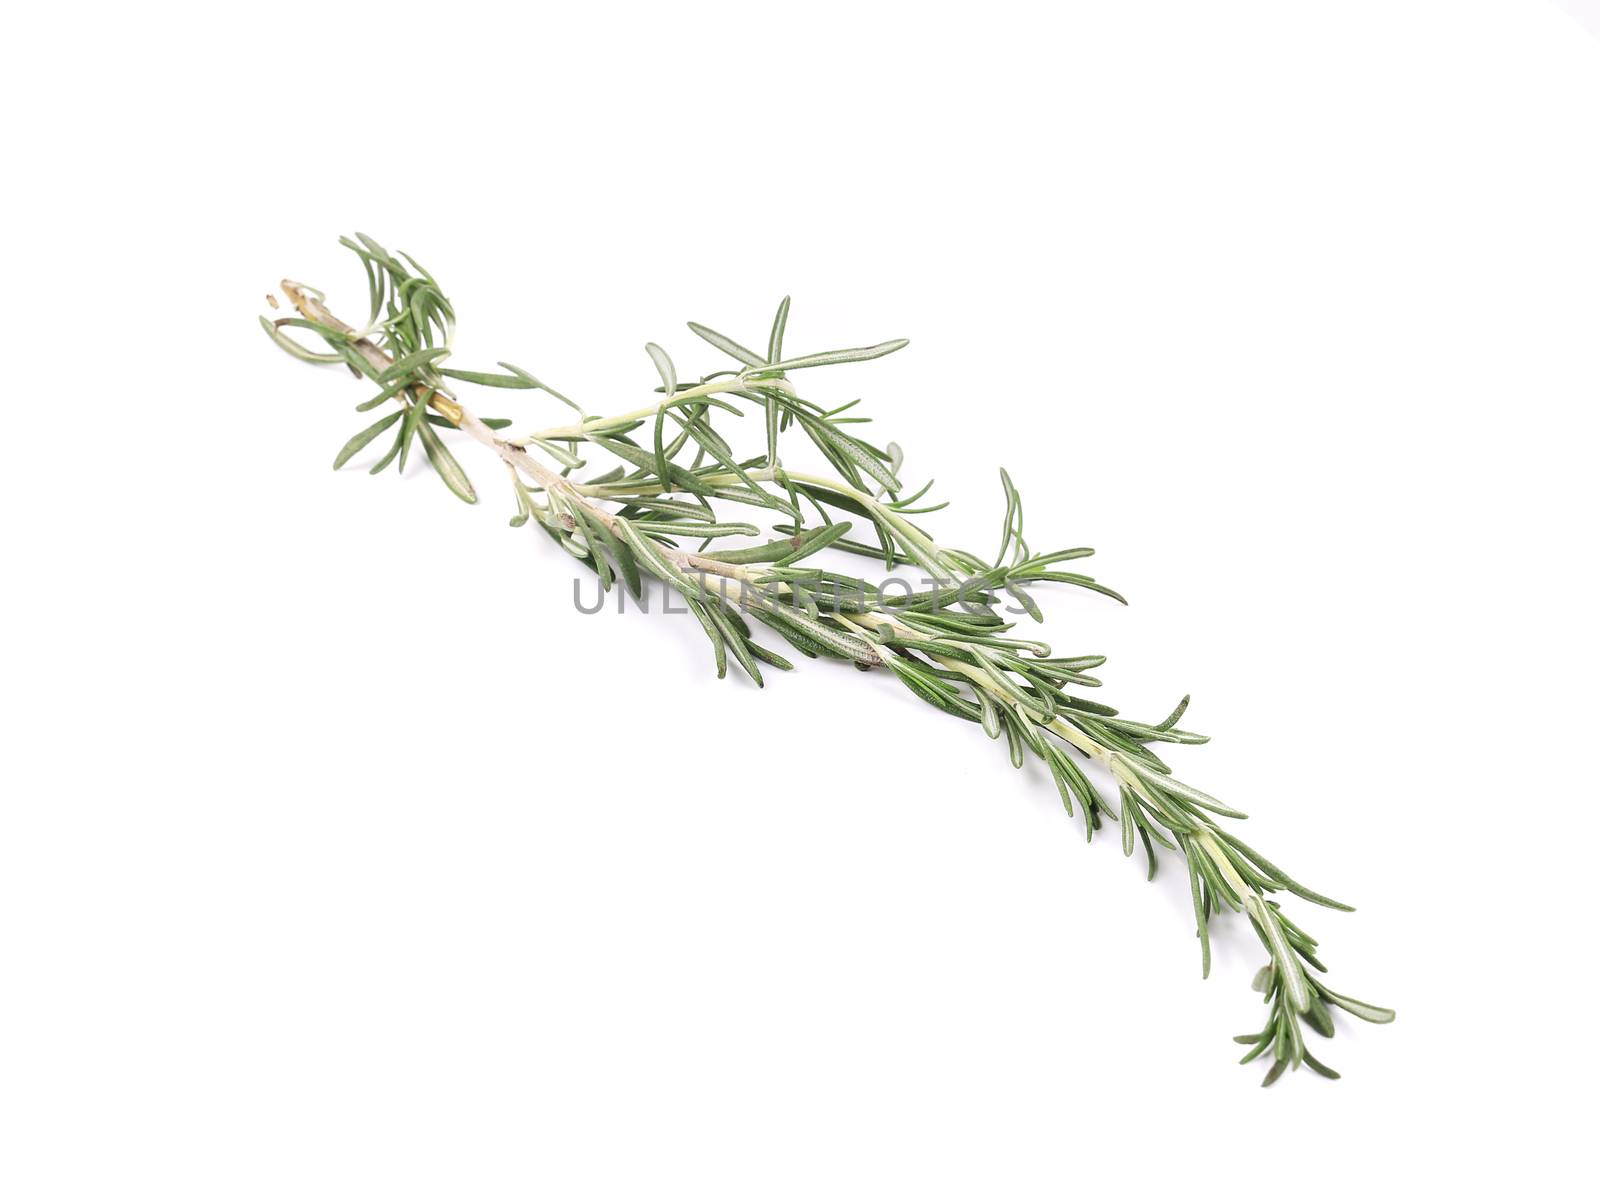 Twig of rosemary. by indigolotos